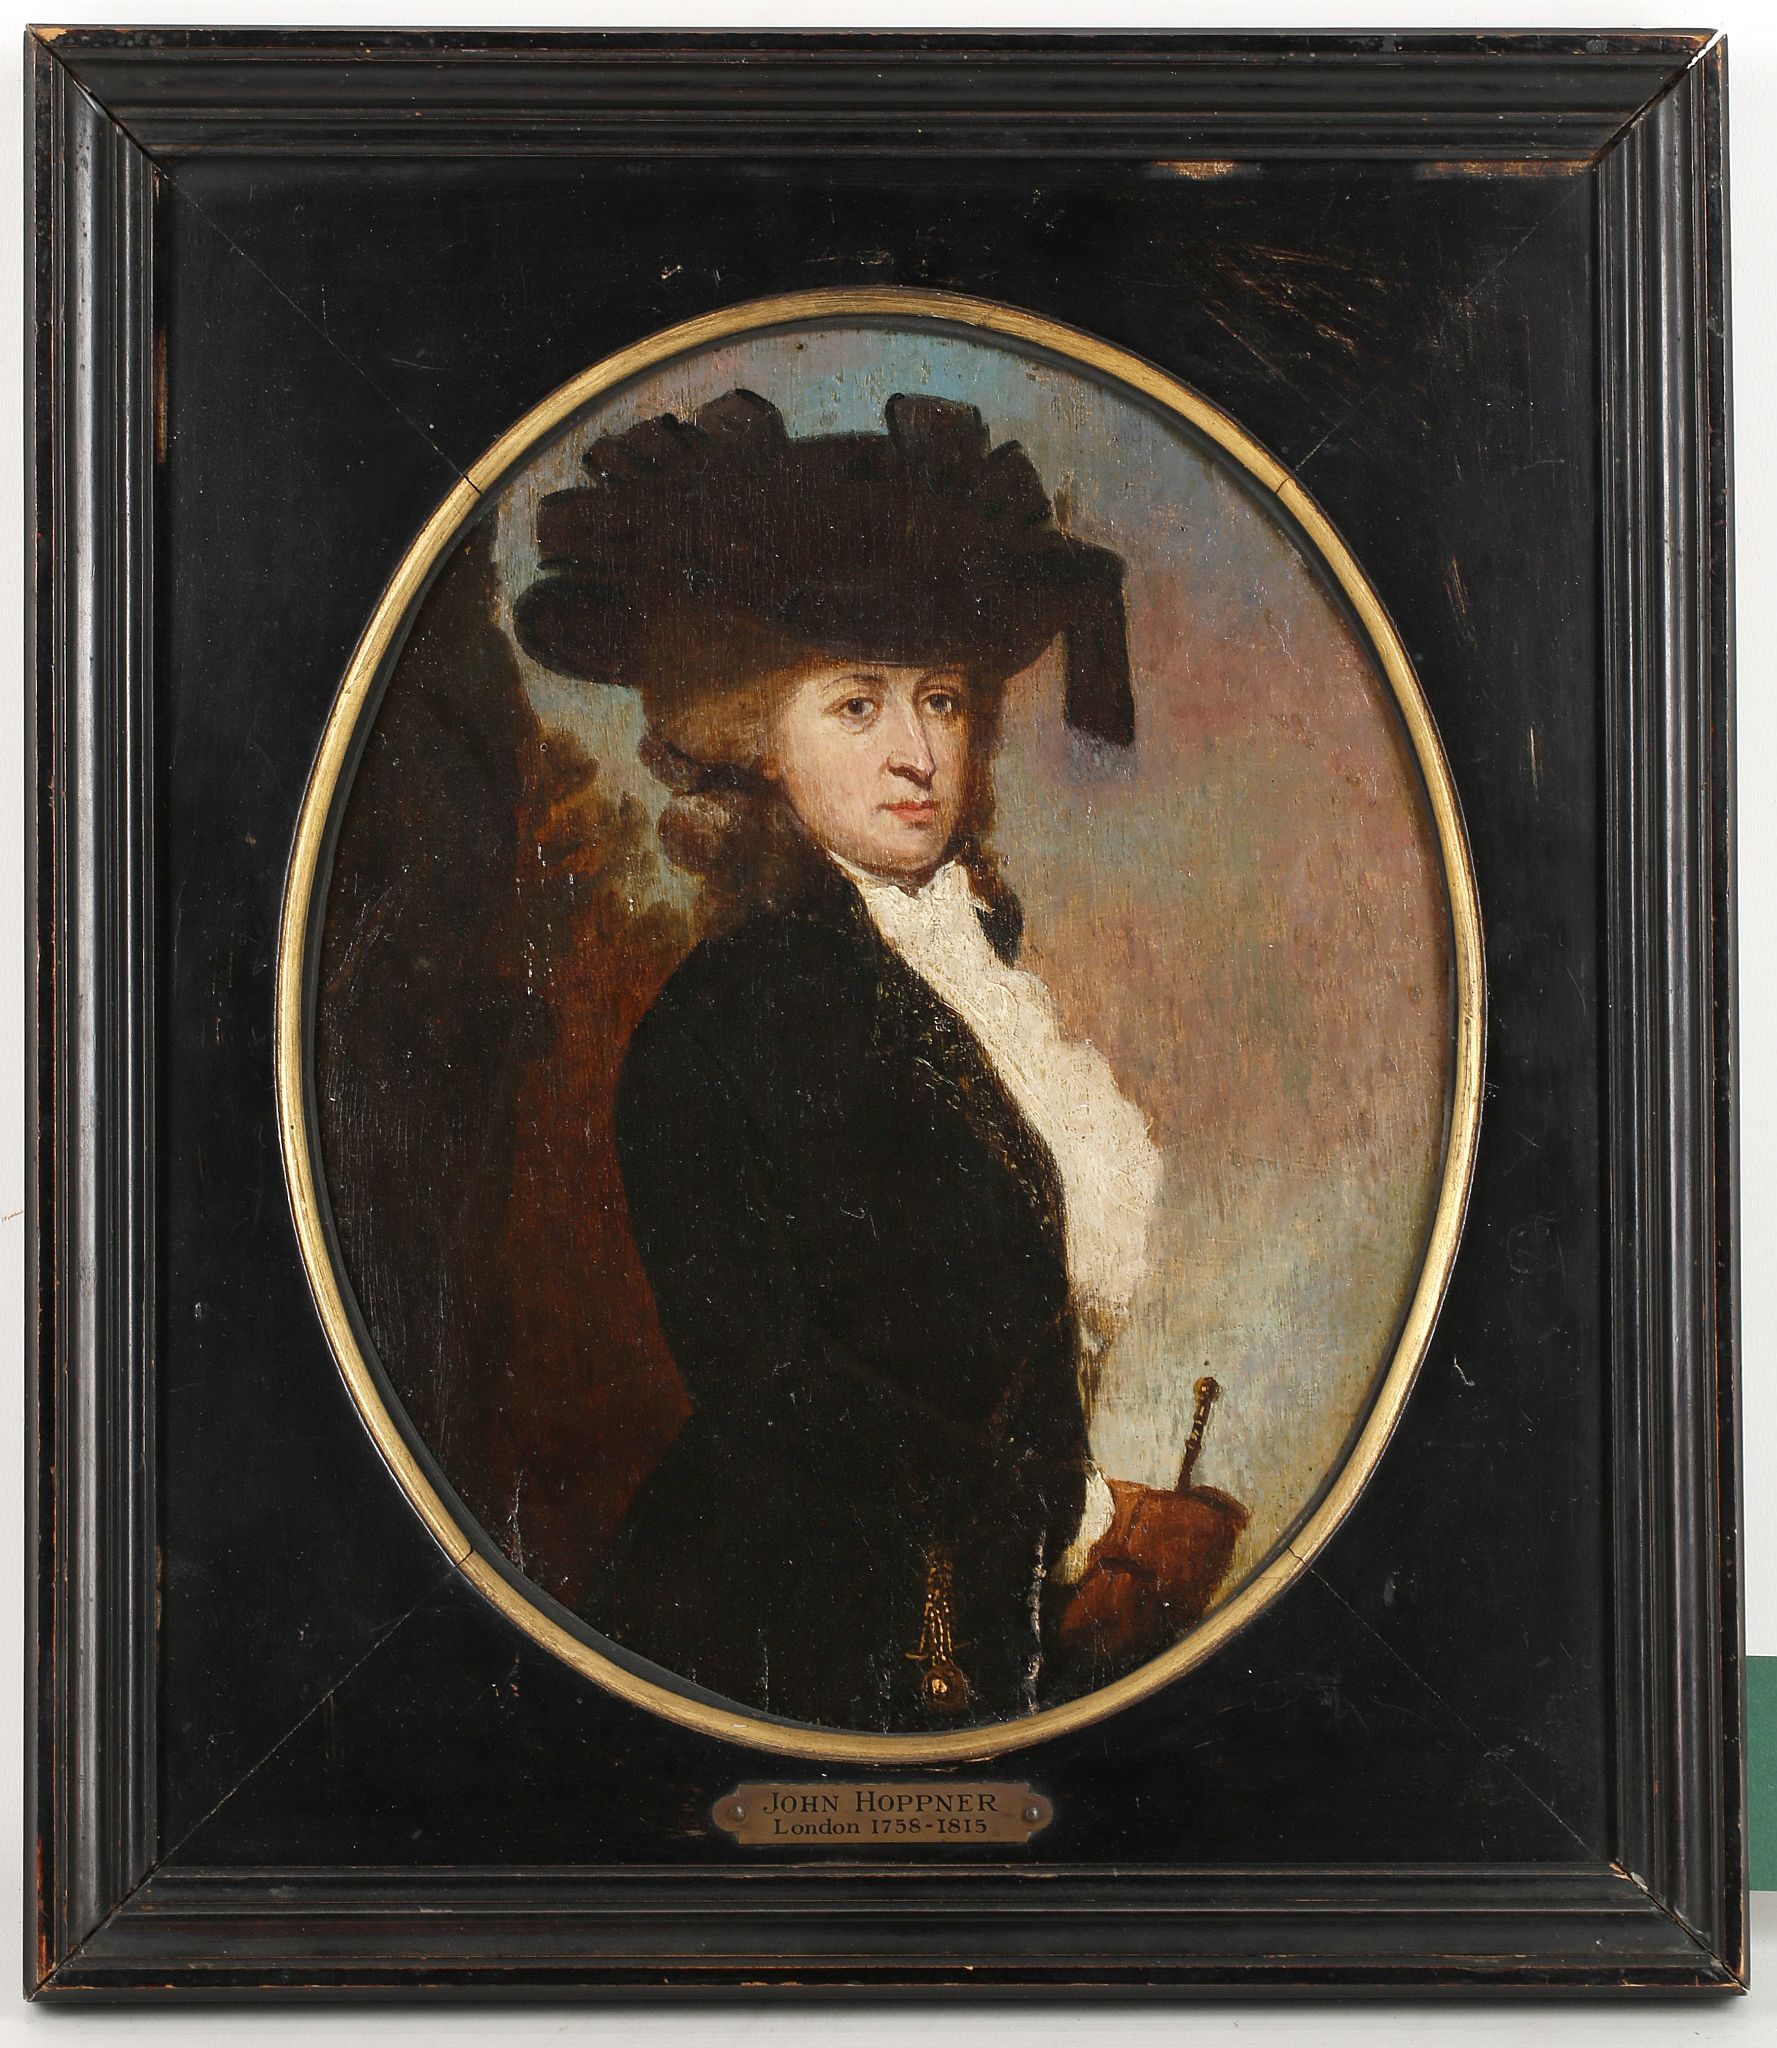 Follower of John Hoppner 1758-1815. 'Portrait of a Lady with Riding Crop'. Oil on oval panel, with